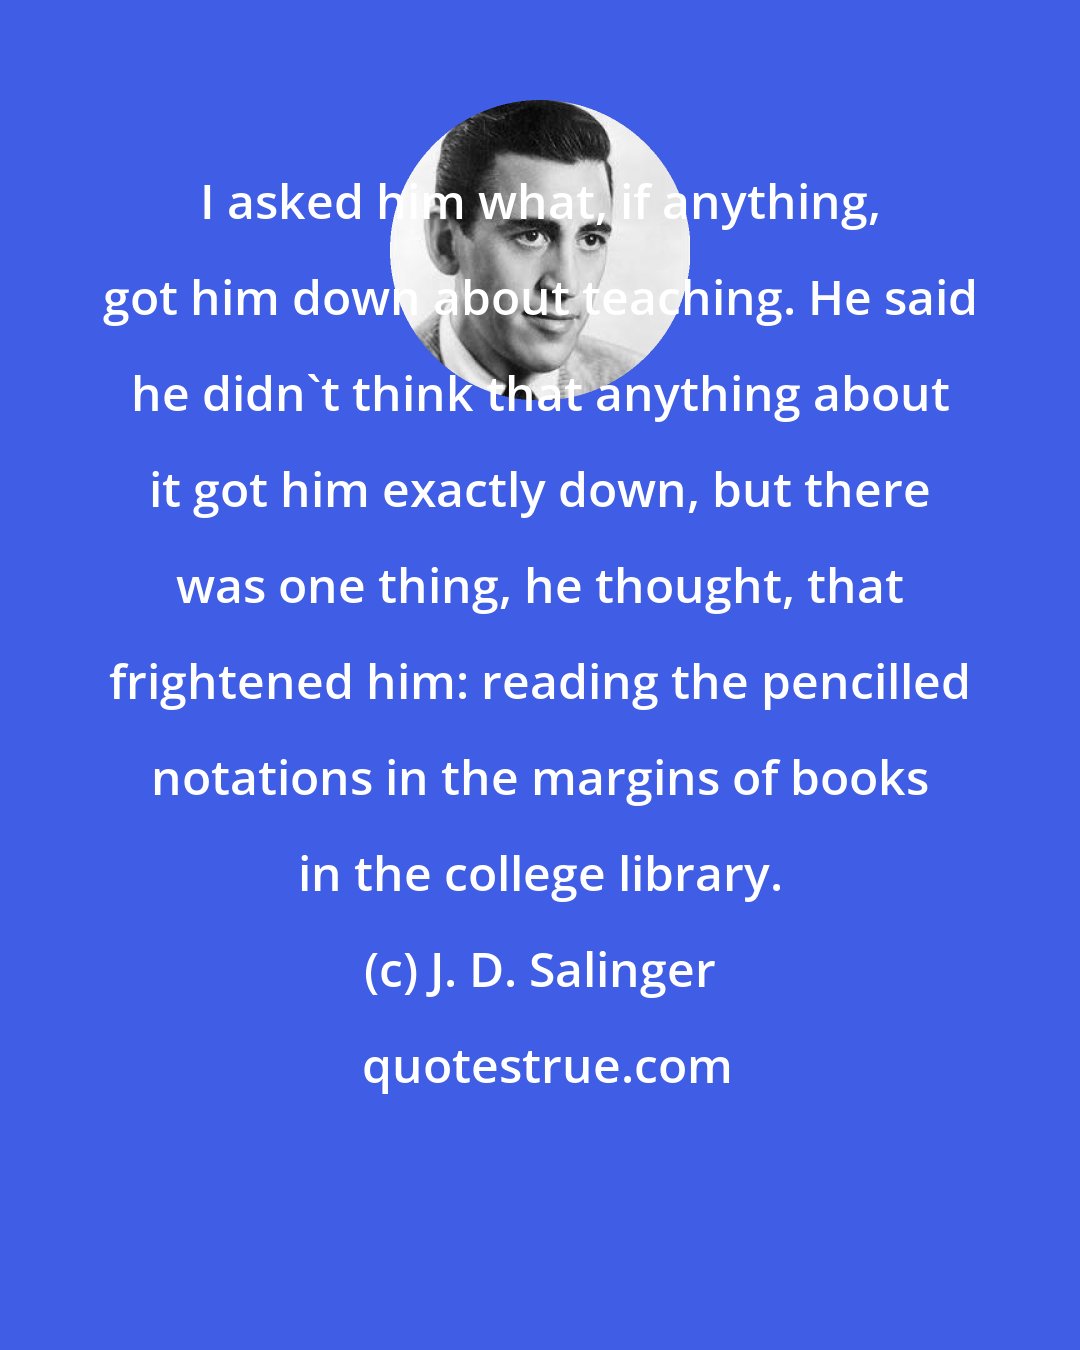 J. D. Salinger: I asked him what, if anything, got him down about teaching. He said he didn't think that anything about it got him exactly down, but there was one thing, he thought, that frightened him: reading the pencilled notations in the margins of books in the college library.